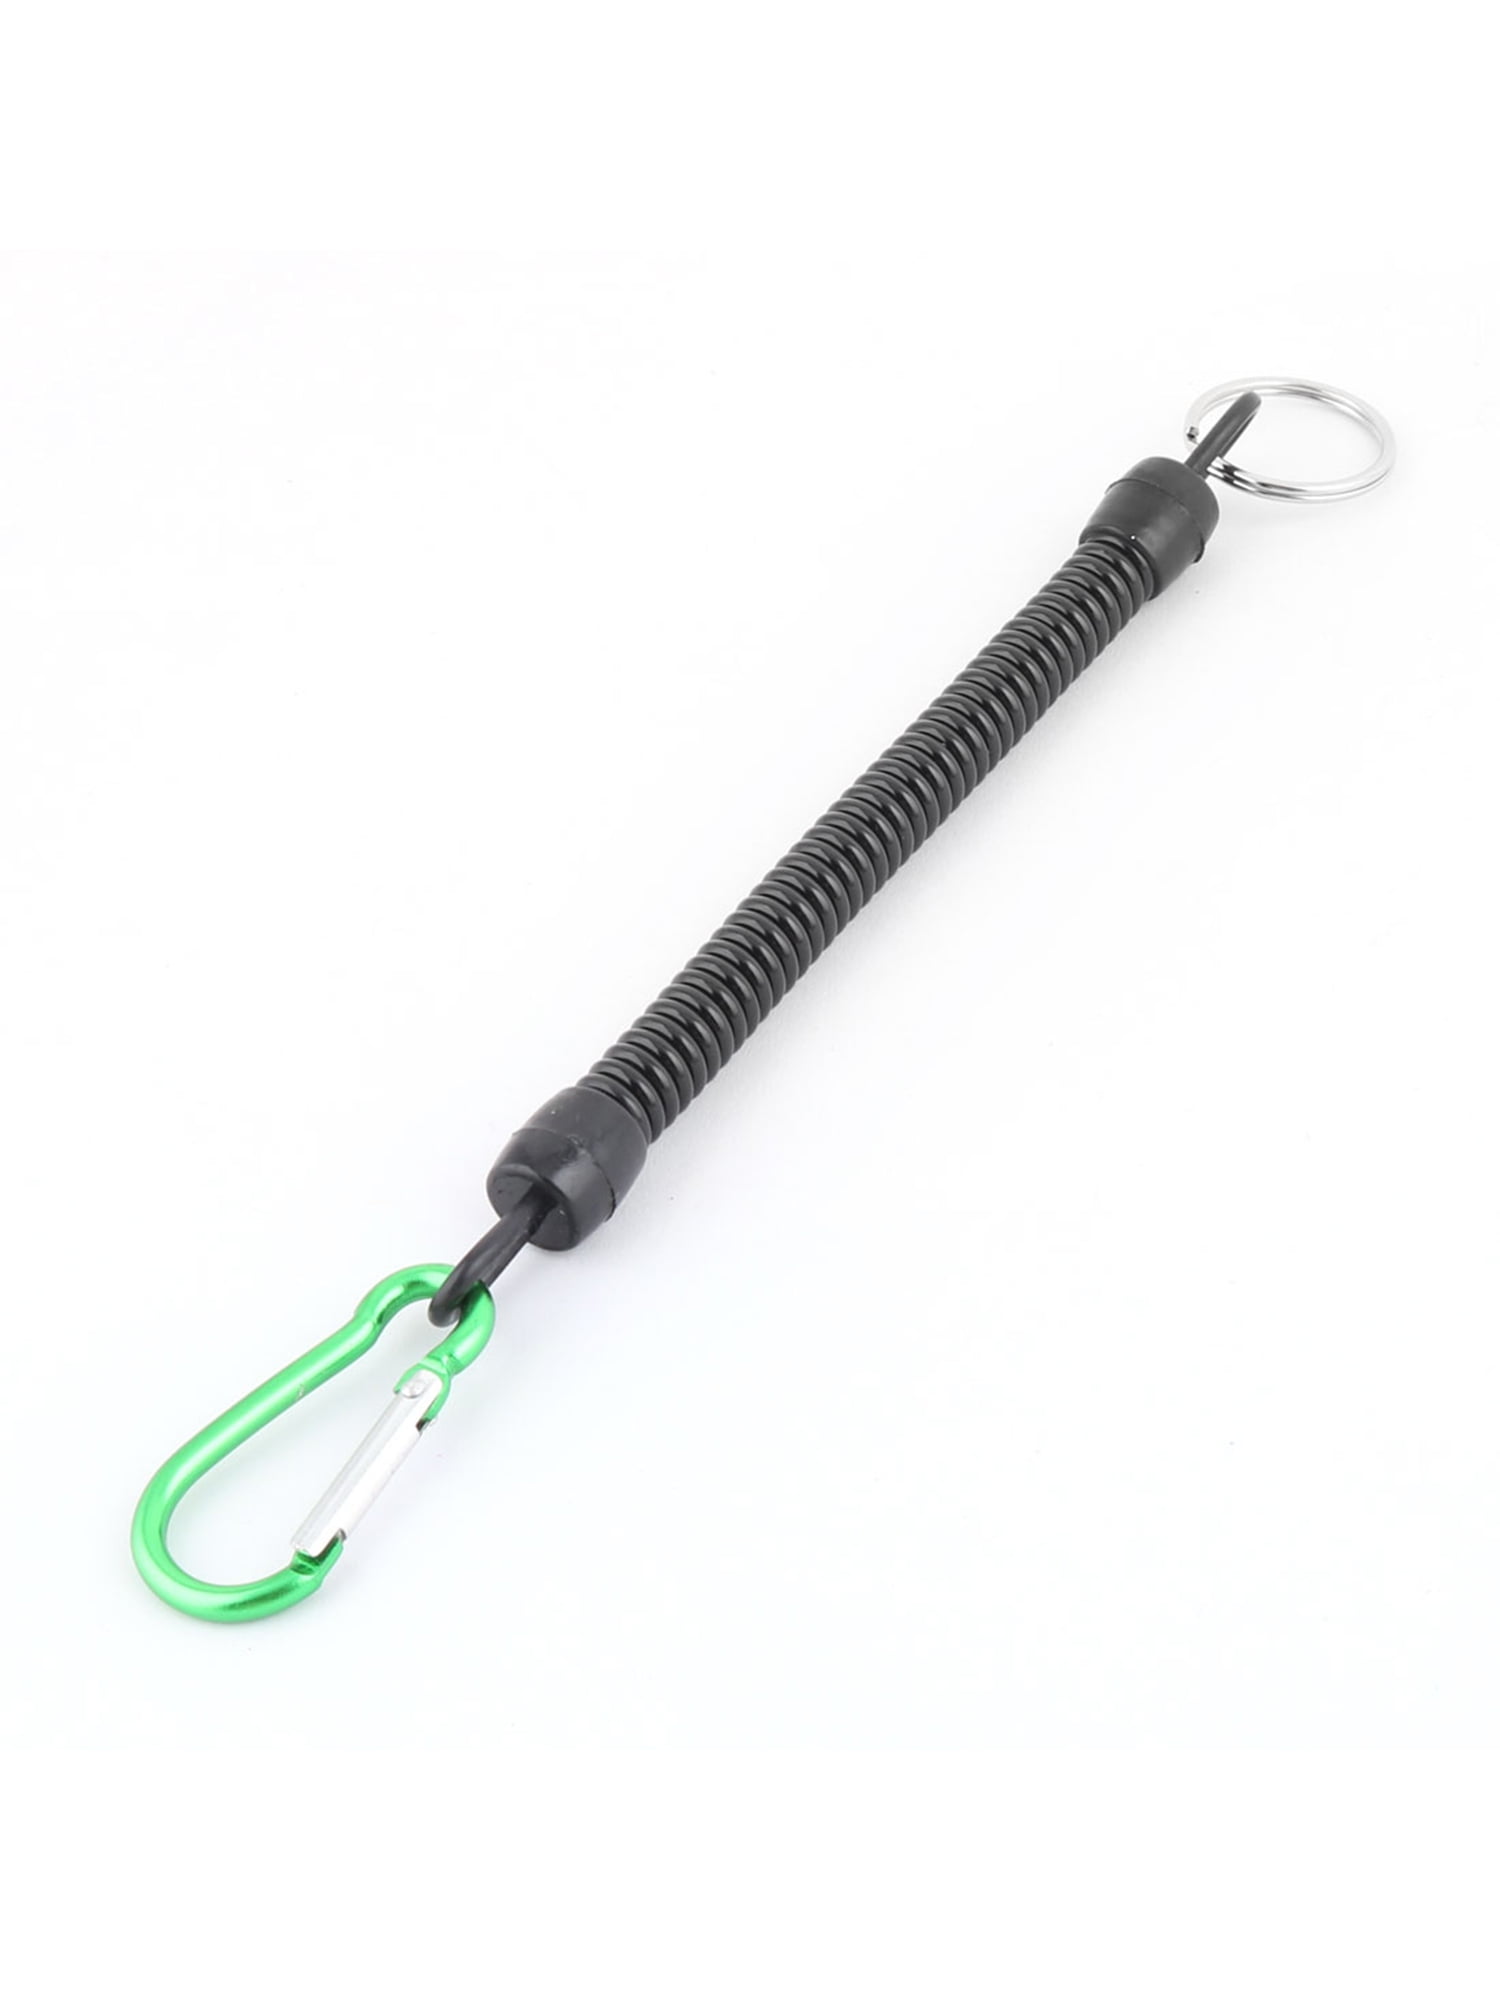 Plastic Snap Hook Cord Stretchy Spring Coil Keychain Black Green 22.5cm ...